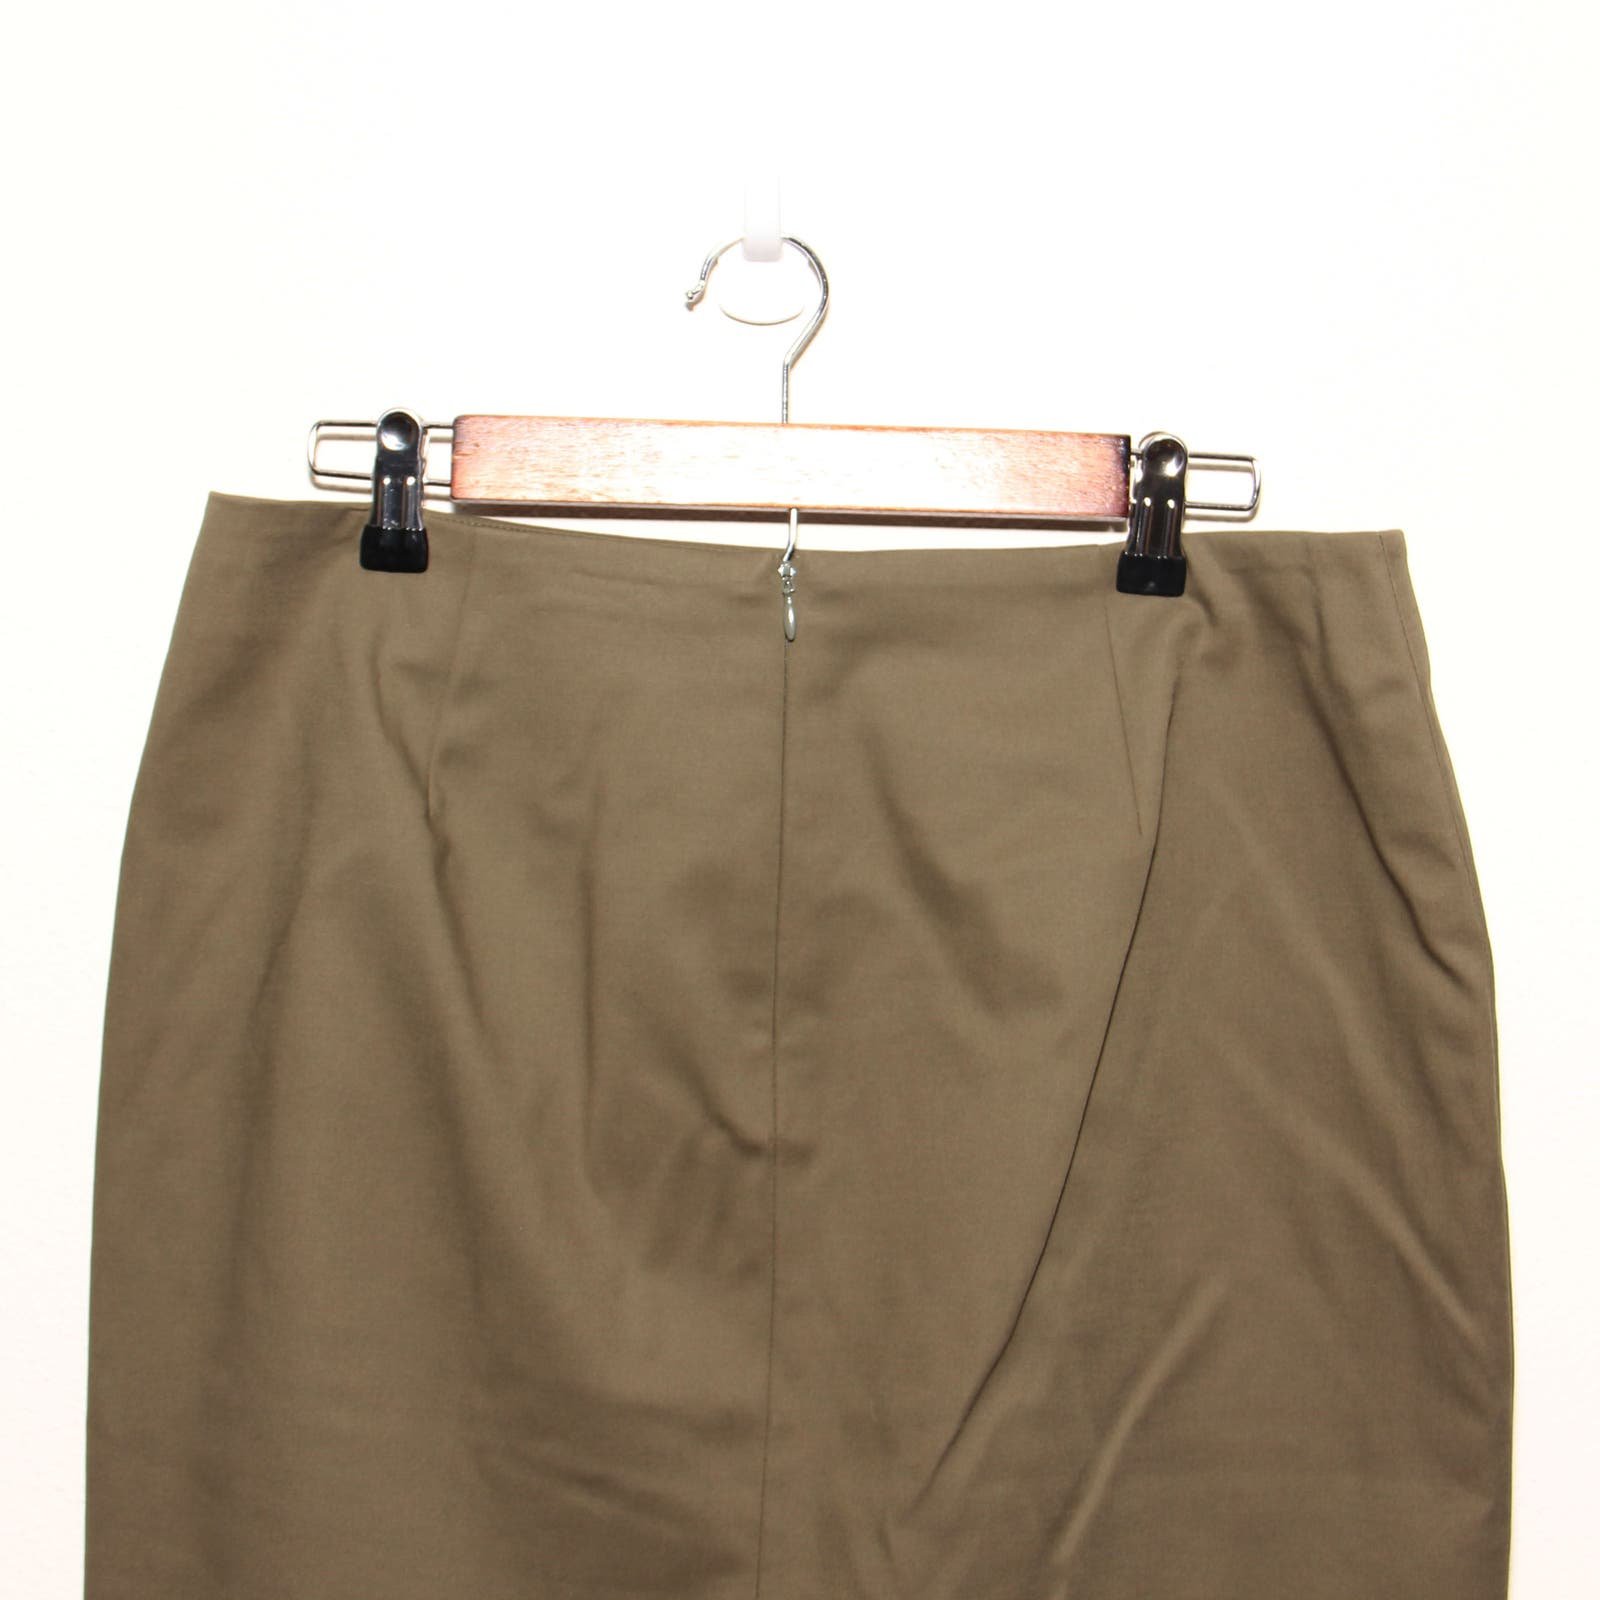 the Lowest price Doncaster Pencil Skirt Size 10 Cotton Spandex Blend Green n6RgQPBje hot sale